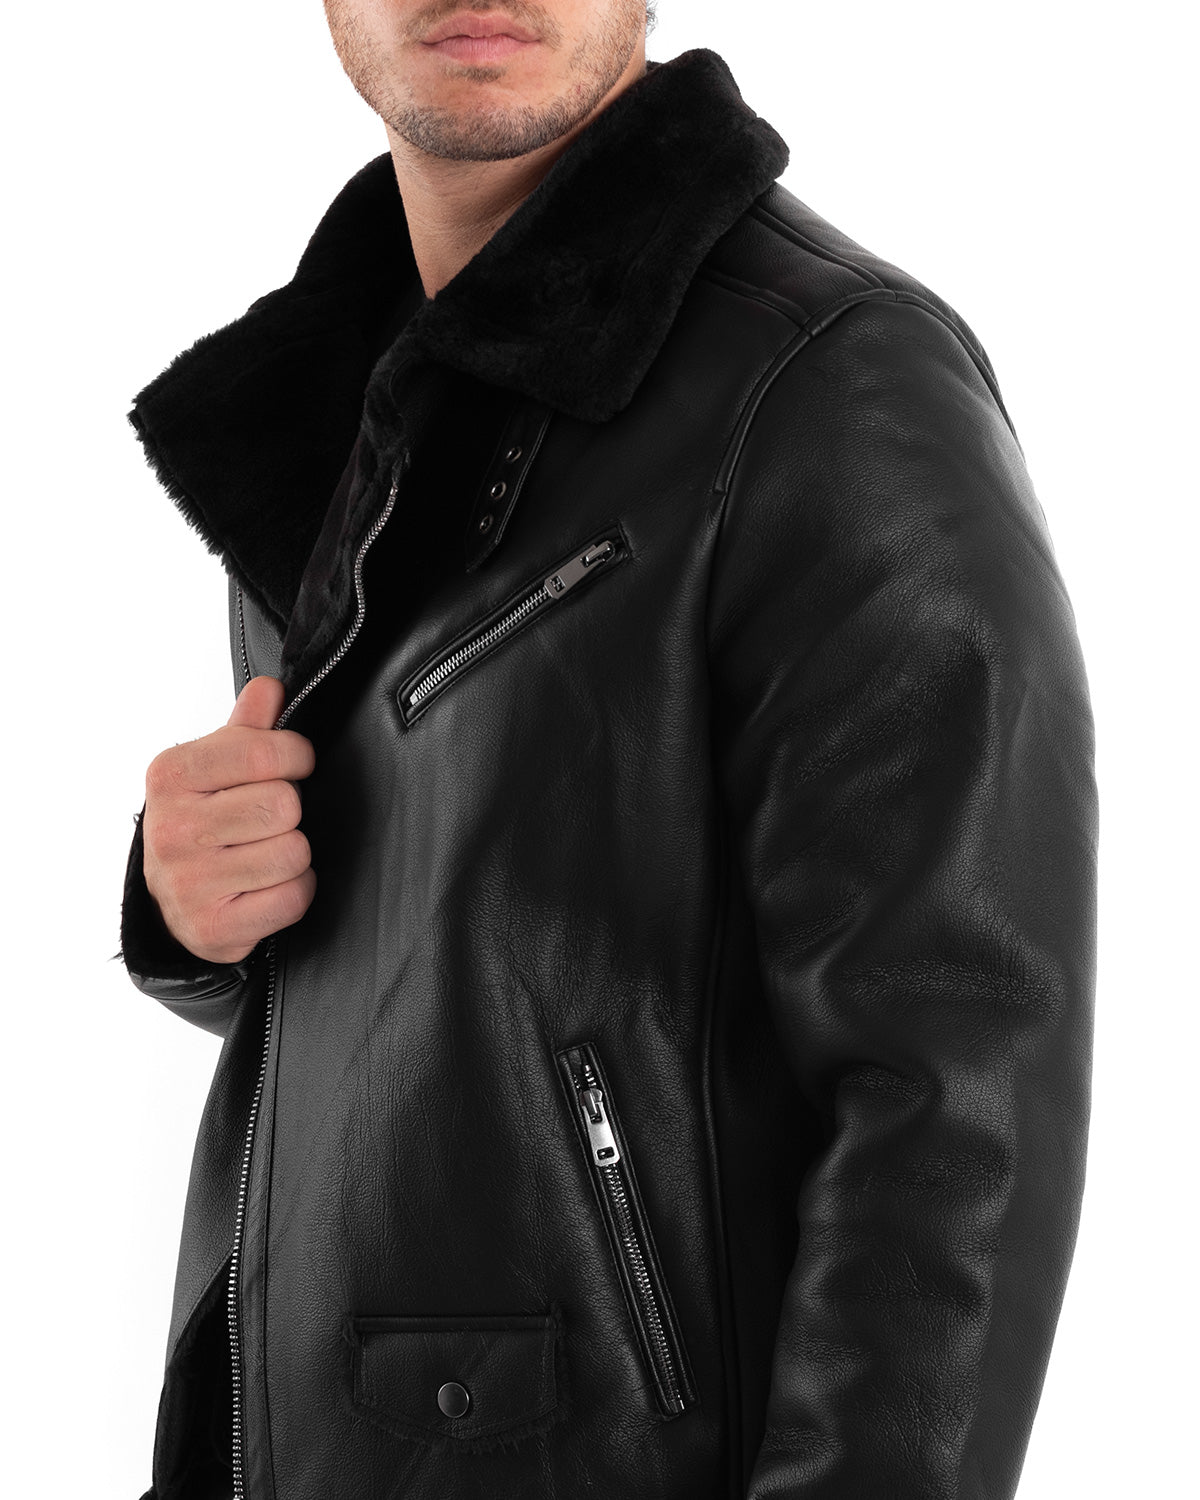 Men's Faux Leather Jacket with Fur Collar Solid Color Black GIOSAL